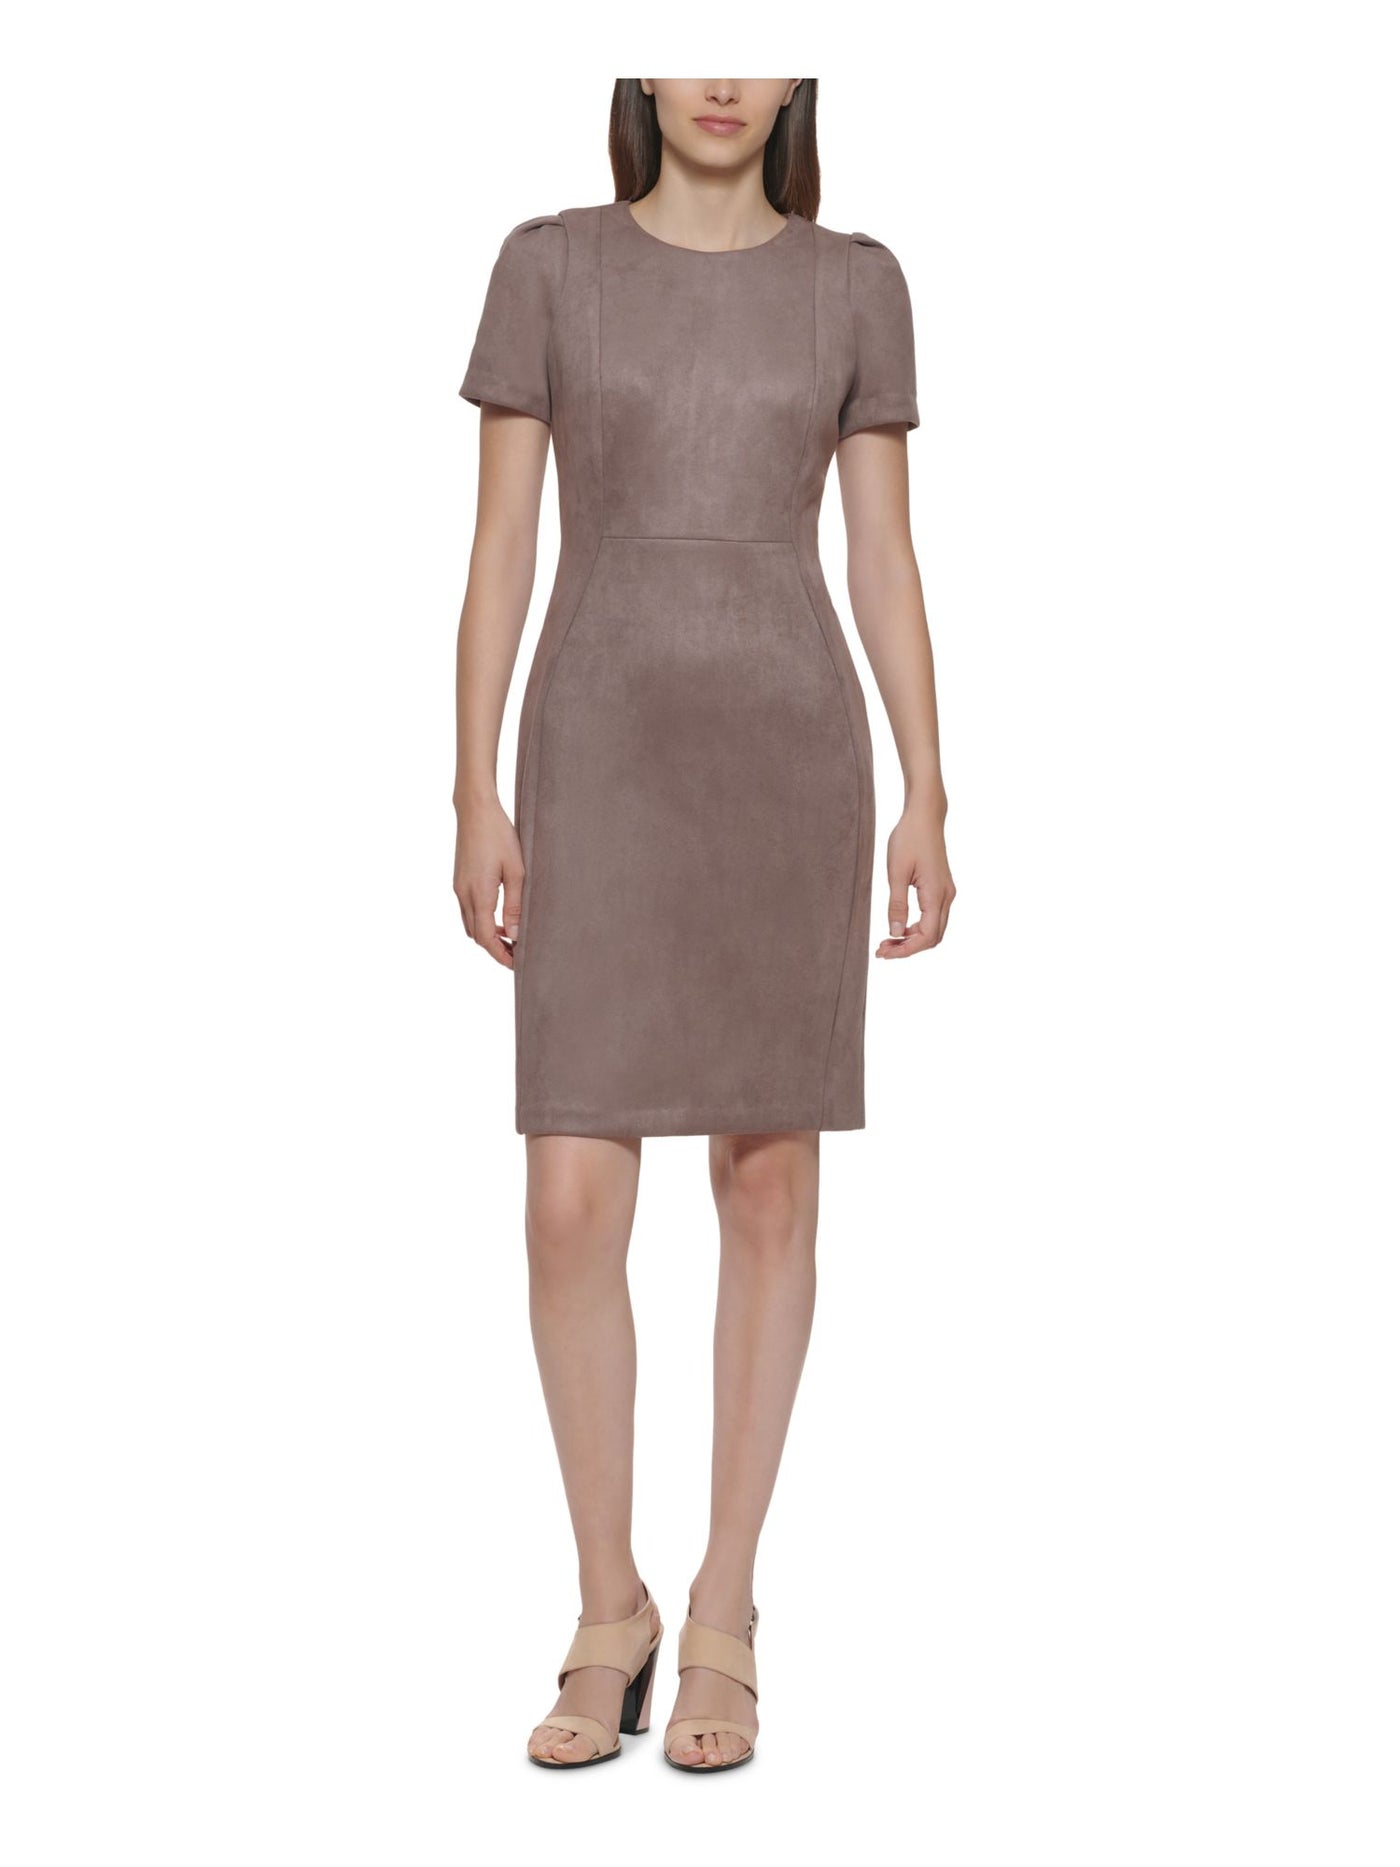 CALVIN KLEIN Womens Brown Stretch Zippered Fitted Pouf Sleeve Jewel Neck Above The Knee Party Sheath Dress Petites 12P